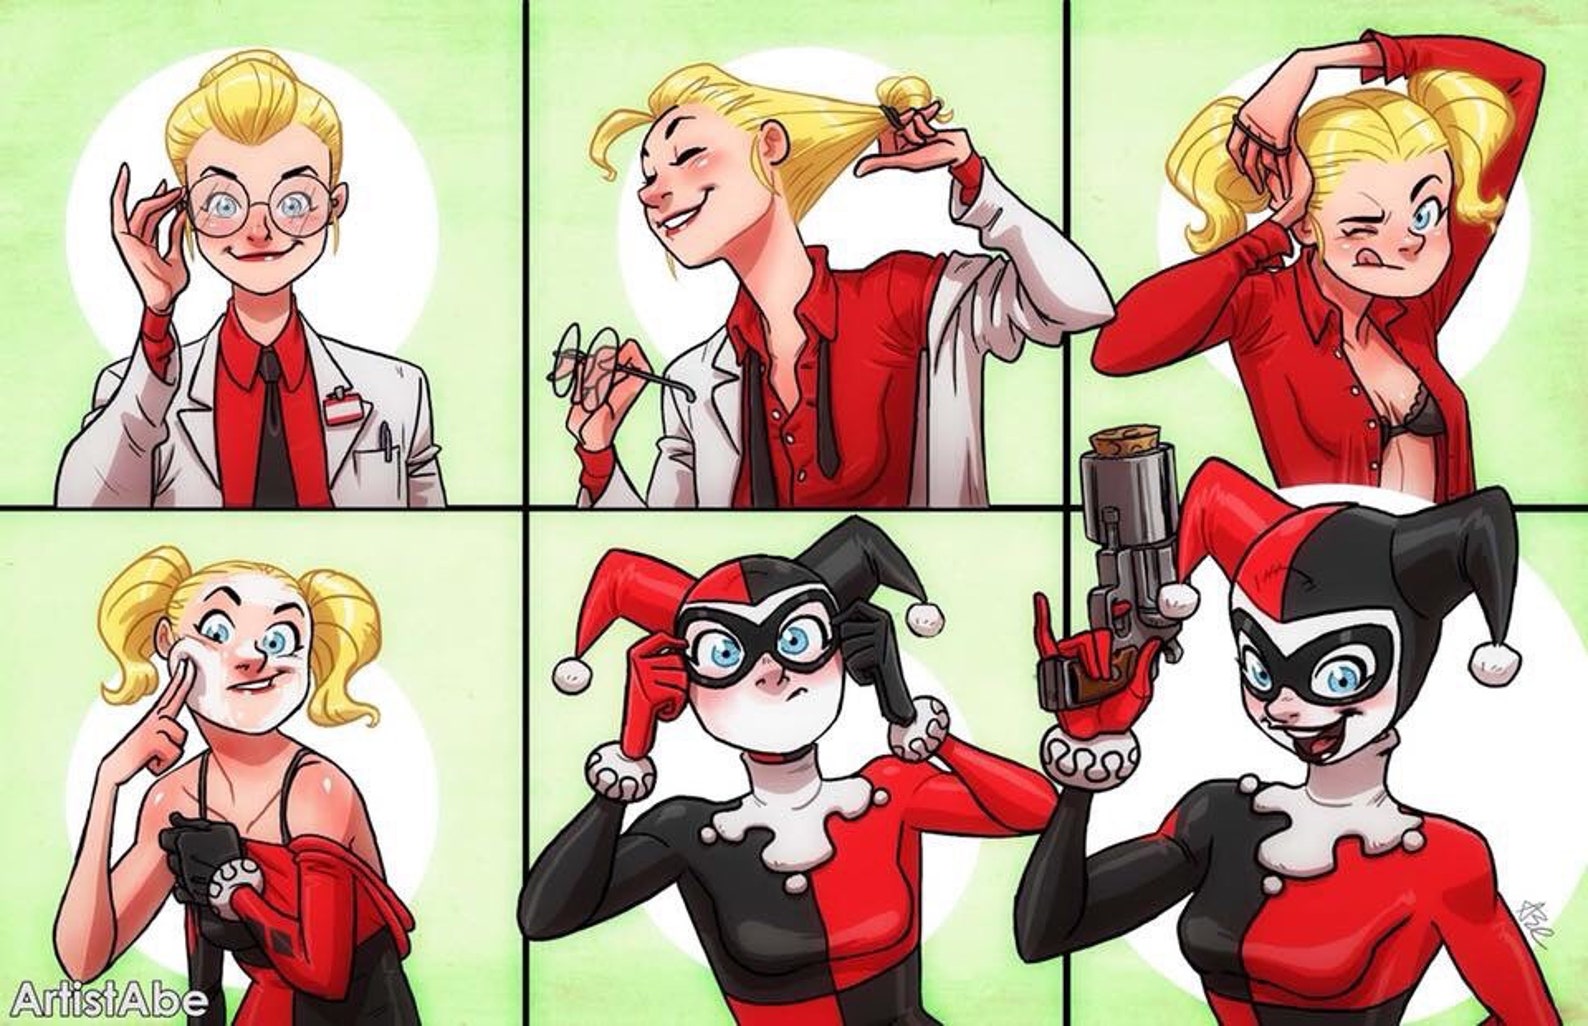 Harley Quinn: What Makes You Happy image 0.